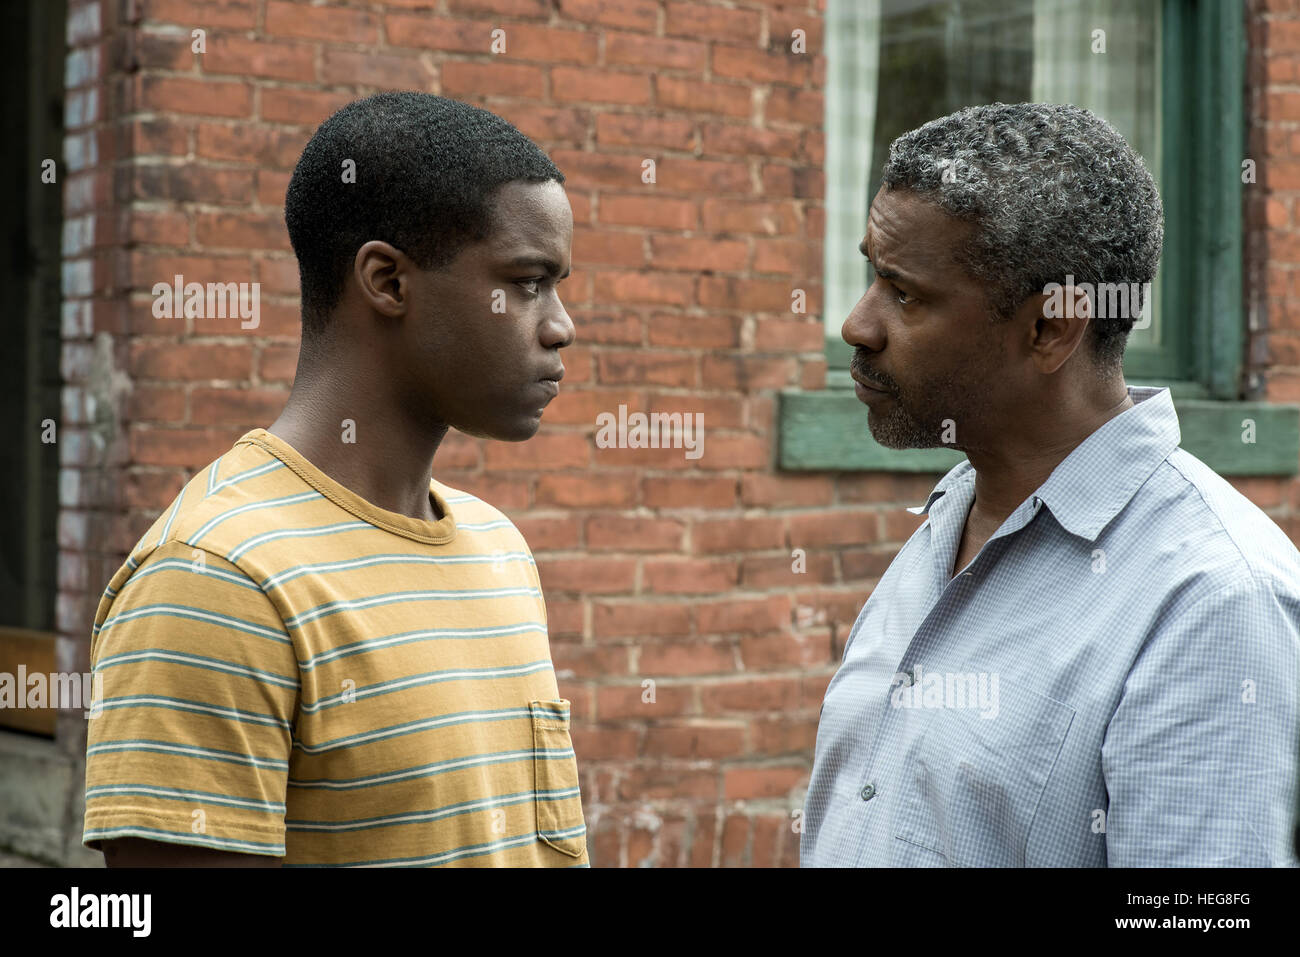 RELEASE DATE: December 25, 2016 TITLE: Fences STUDIO: Paramount Pictures DIRECTOR: Denzel Washington PLOT: An African American father struggles with race relations in the United States while trying to raise his family in the 1950s and coming to terms with the events of his life STARRING: Jovan Adepo as Cory, Denzel Washington as Troy (Credit: © Paramount Pictures/Entertainment Pictures) Stock Photo